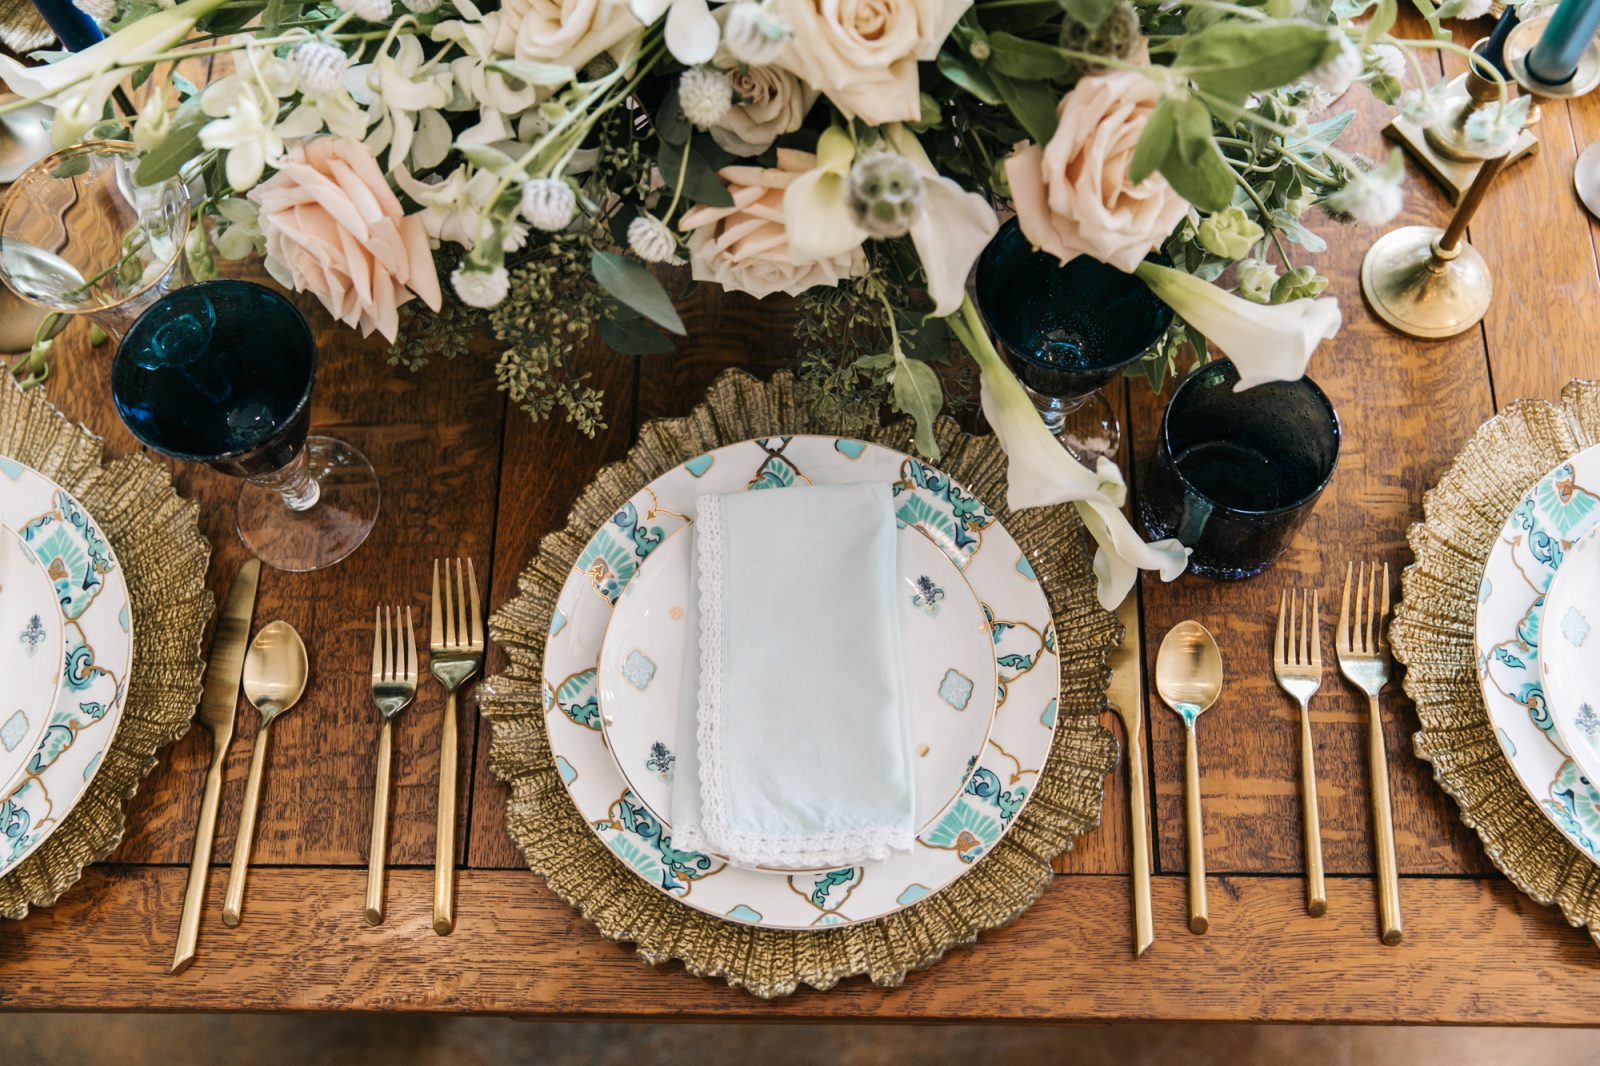 Styled wedding table with golden and blue accents from Marquee Event Rentals and flower centerpiece by Haute Floral photographed by Julia Sharapova